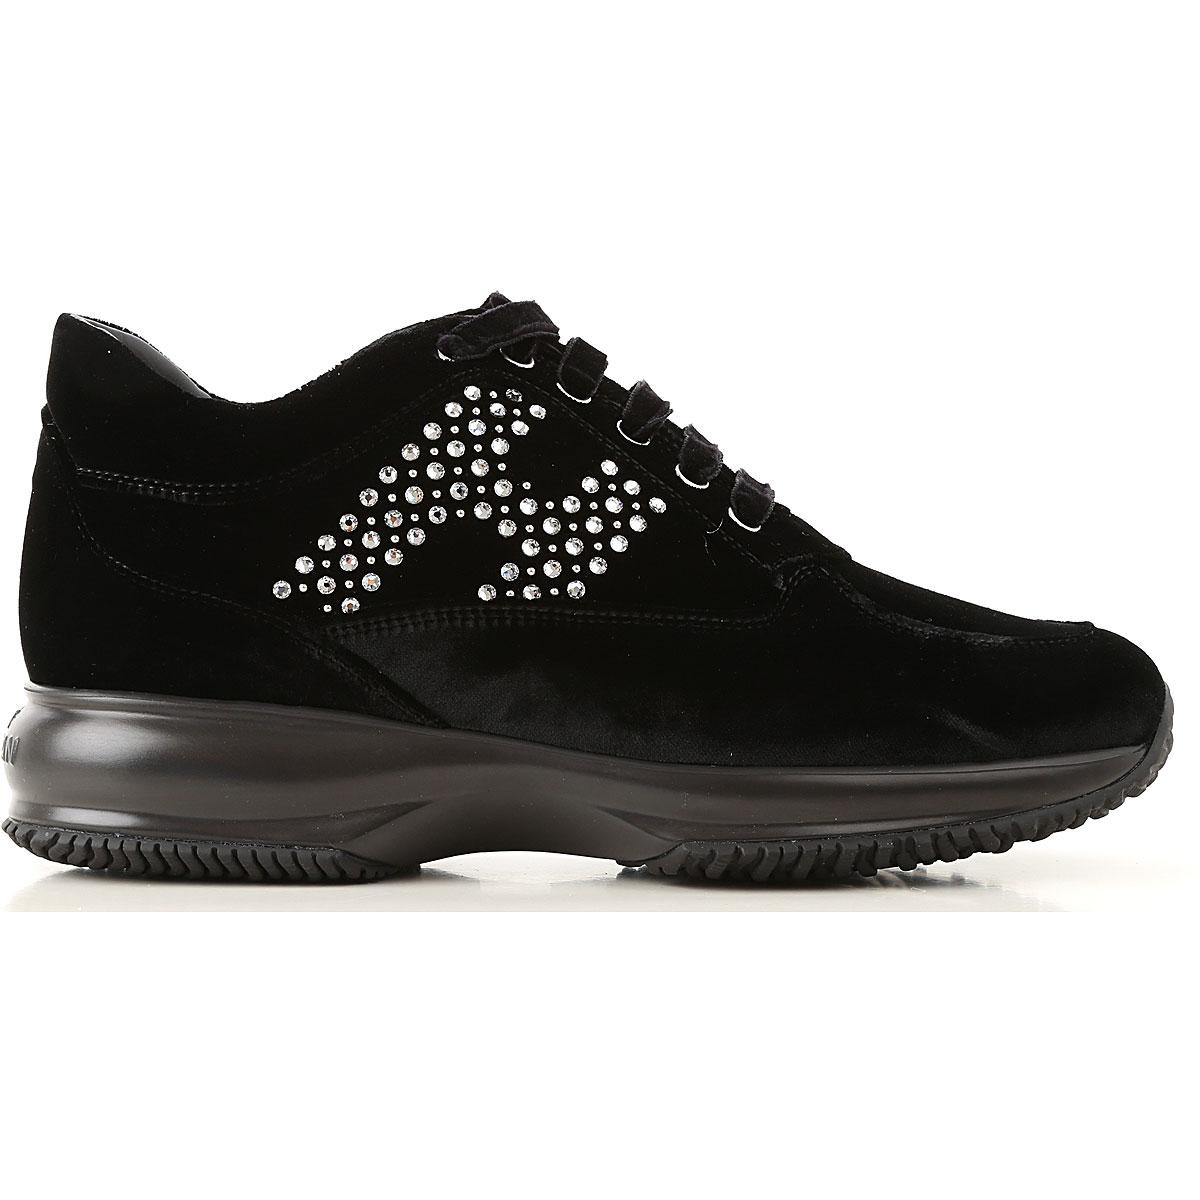 Hogan Leather Sneakers For Women On Sale In Outlet in Black - Lyst